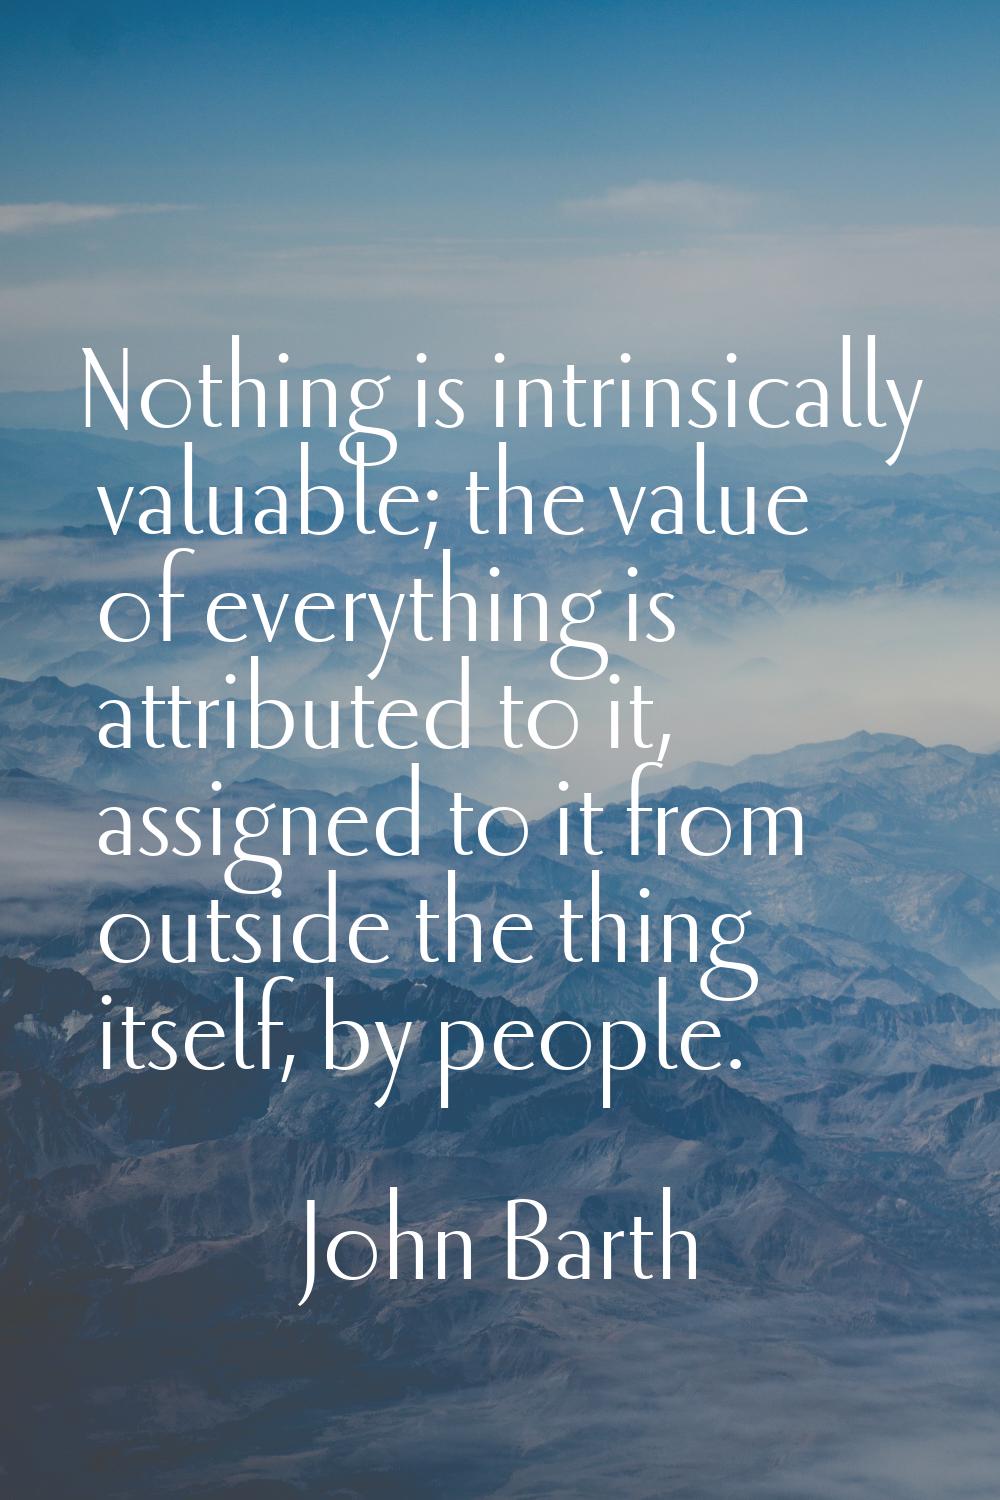 Nothing is intrinsically valuable; the value of everything is attributed to it, assigned to it from